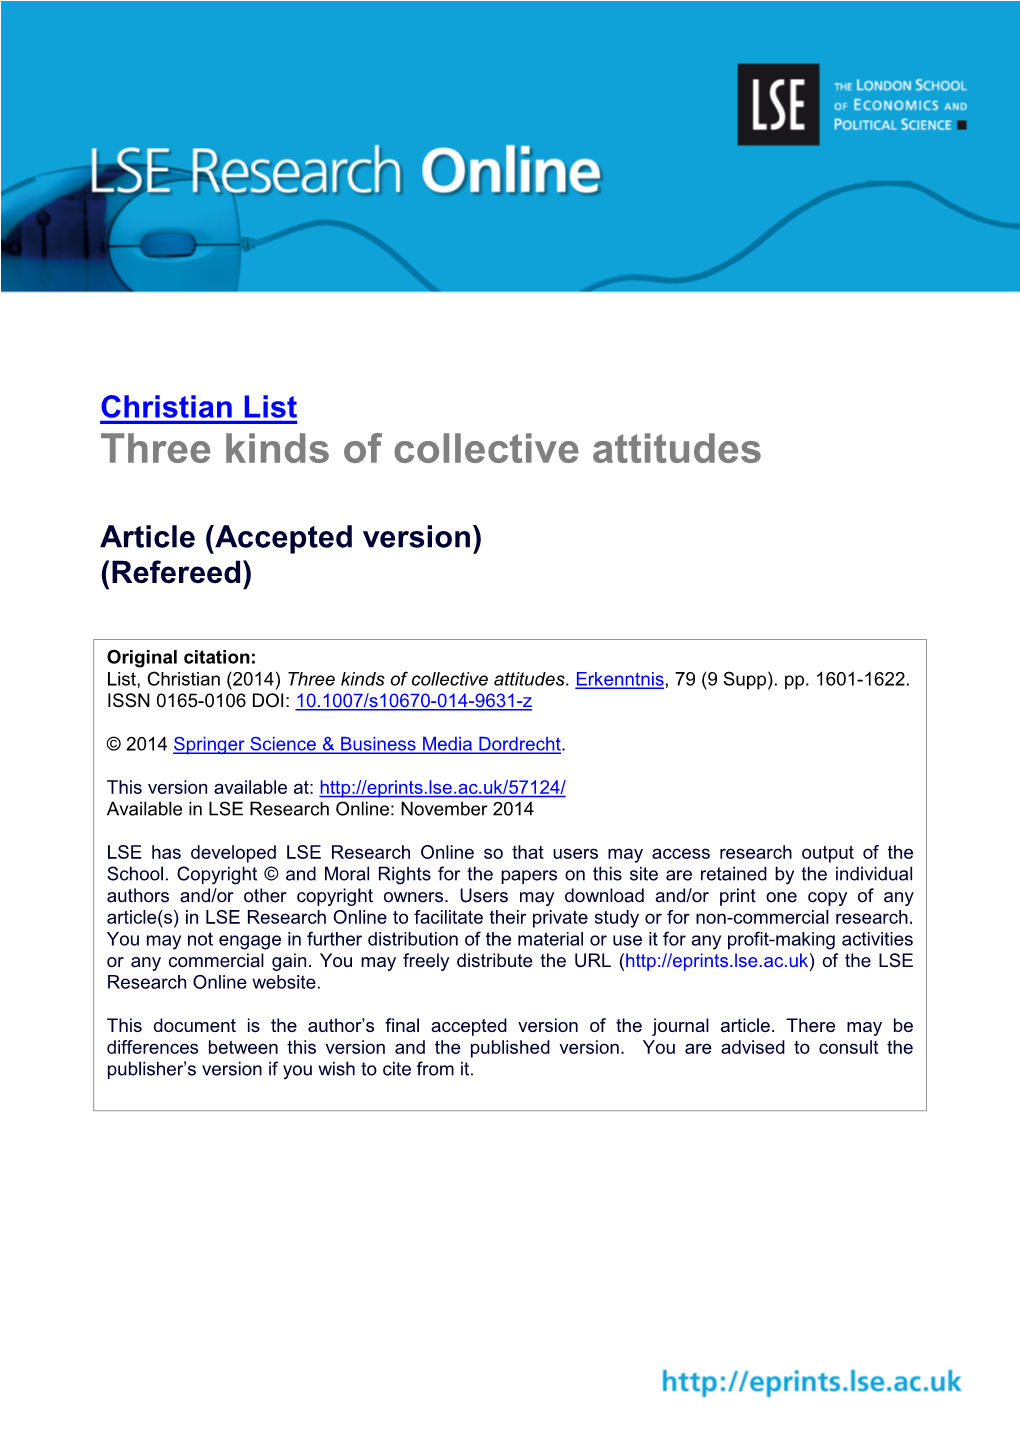 Christian List Three Kinds of Collective Attitudes